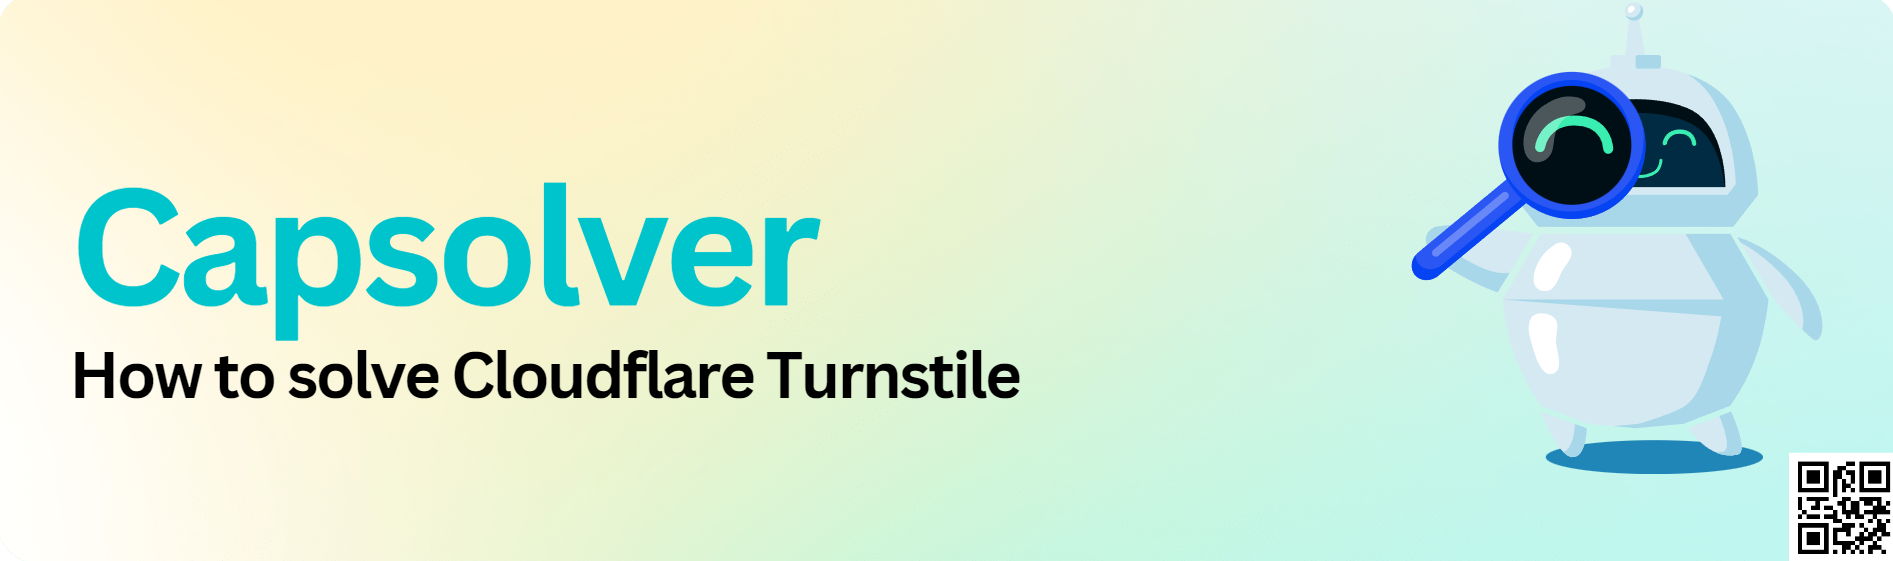 How to solve Cloudflare Turnstile